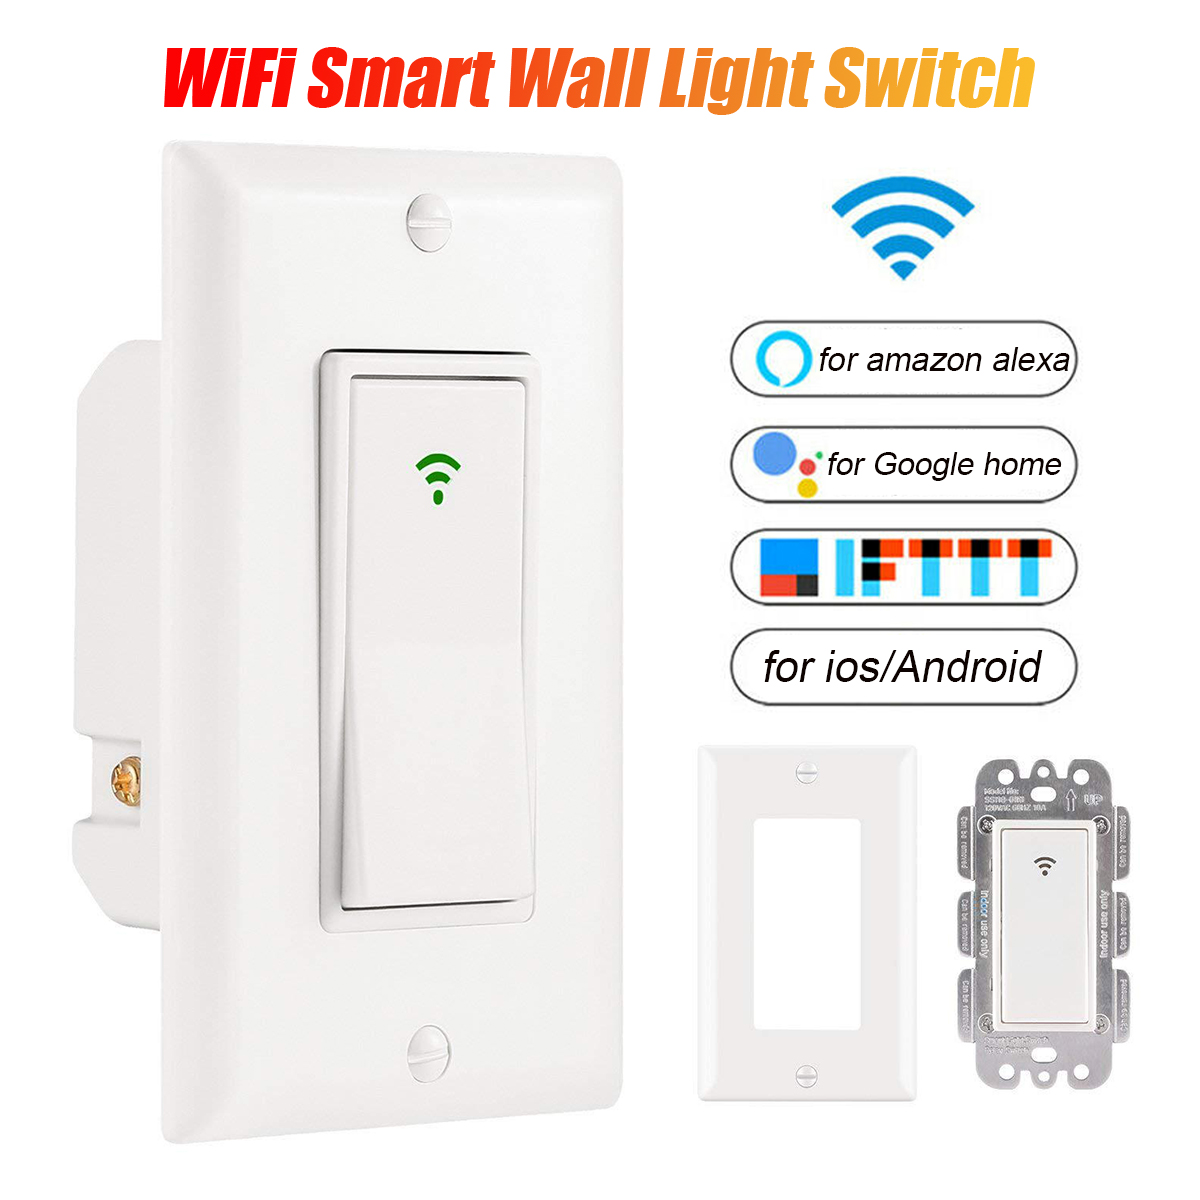 WiFi-Smart-Wall-Light-Wireless-Touch-Panel-Switch-App-Timing-for-Alexa-Google-Home-Remote-Control-1617891-1